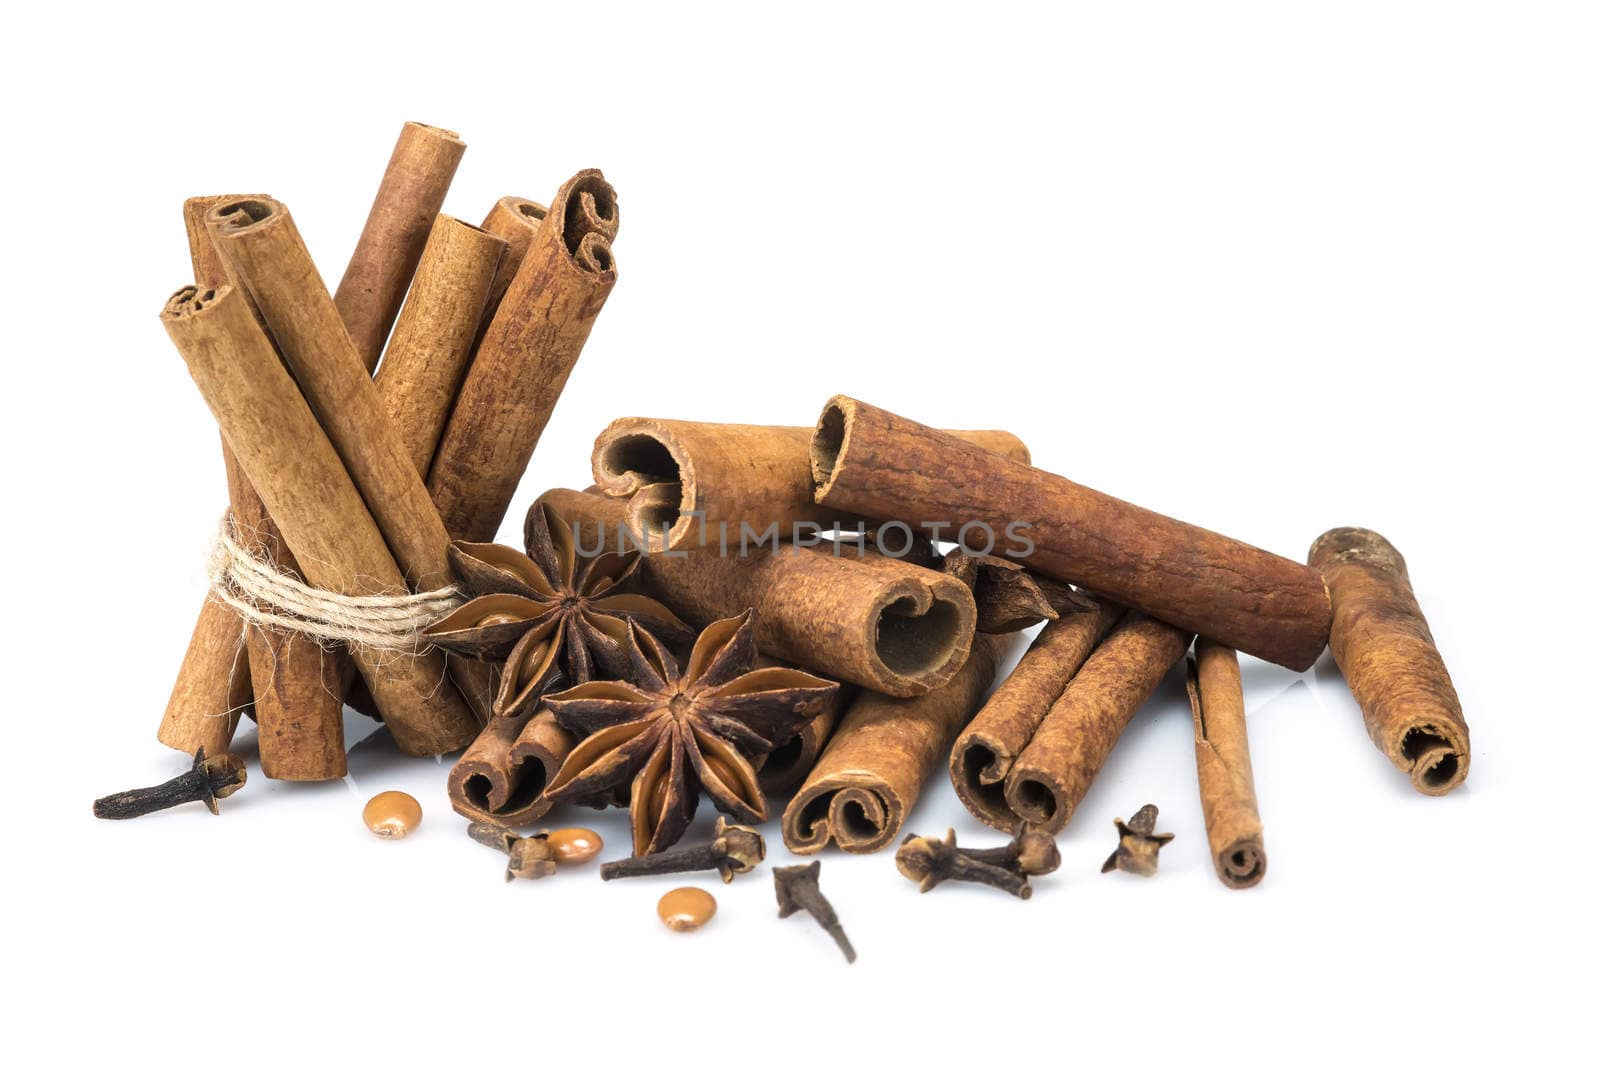 Cinnamon with star anise and clove by angelsimon